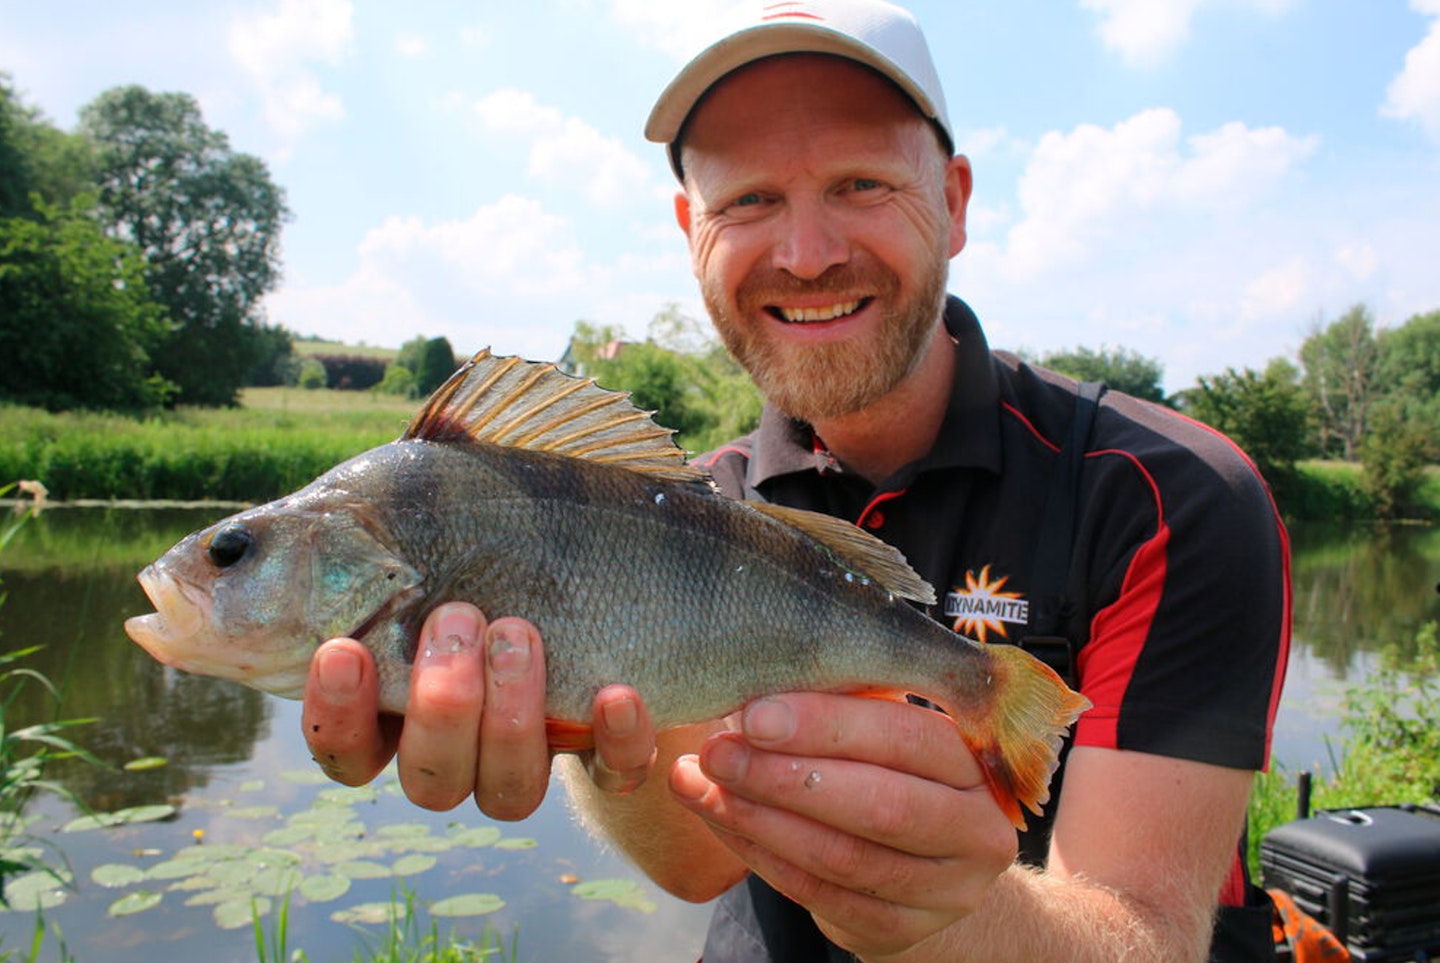 Big river perch can be great weight-builders